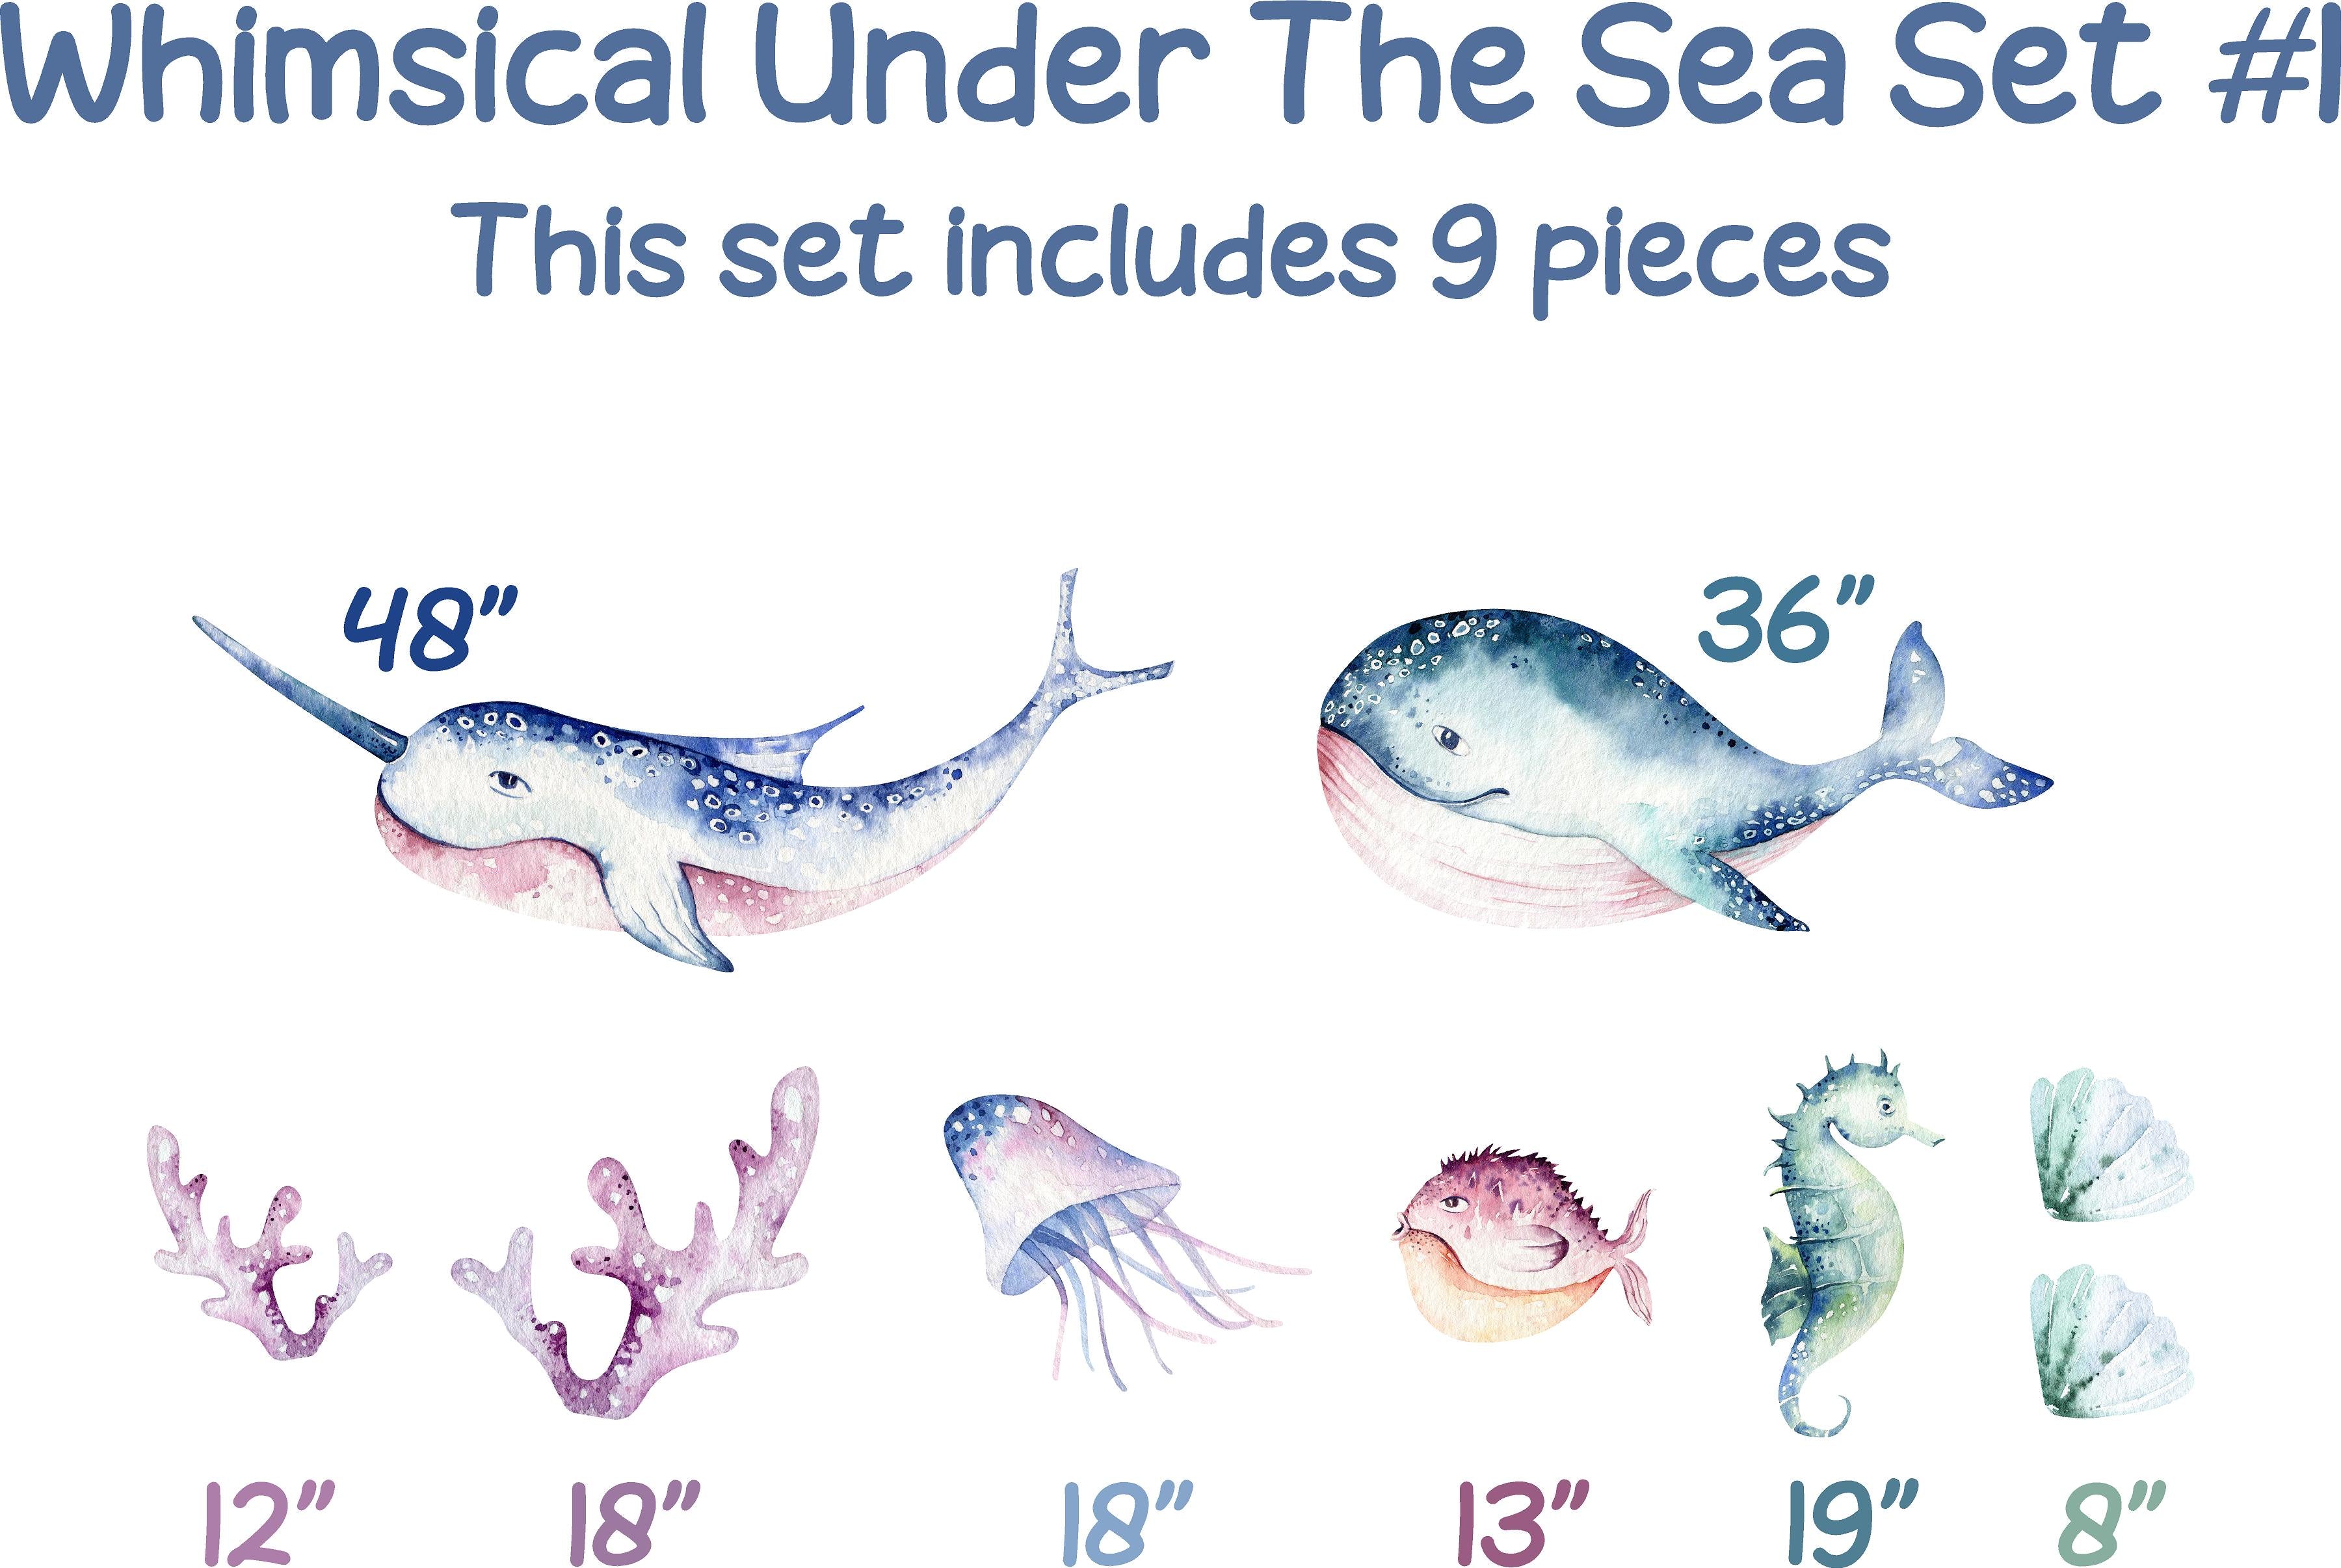 Whimsical Under The Sea Wall Decal Set #1 Ocean Sea Life Removable Fabric Wall Sticker | DecalBaby